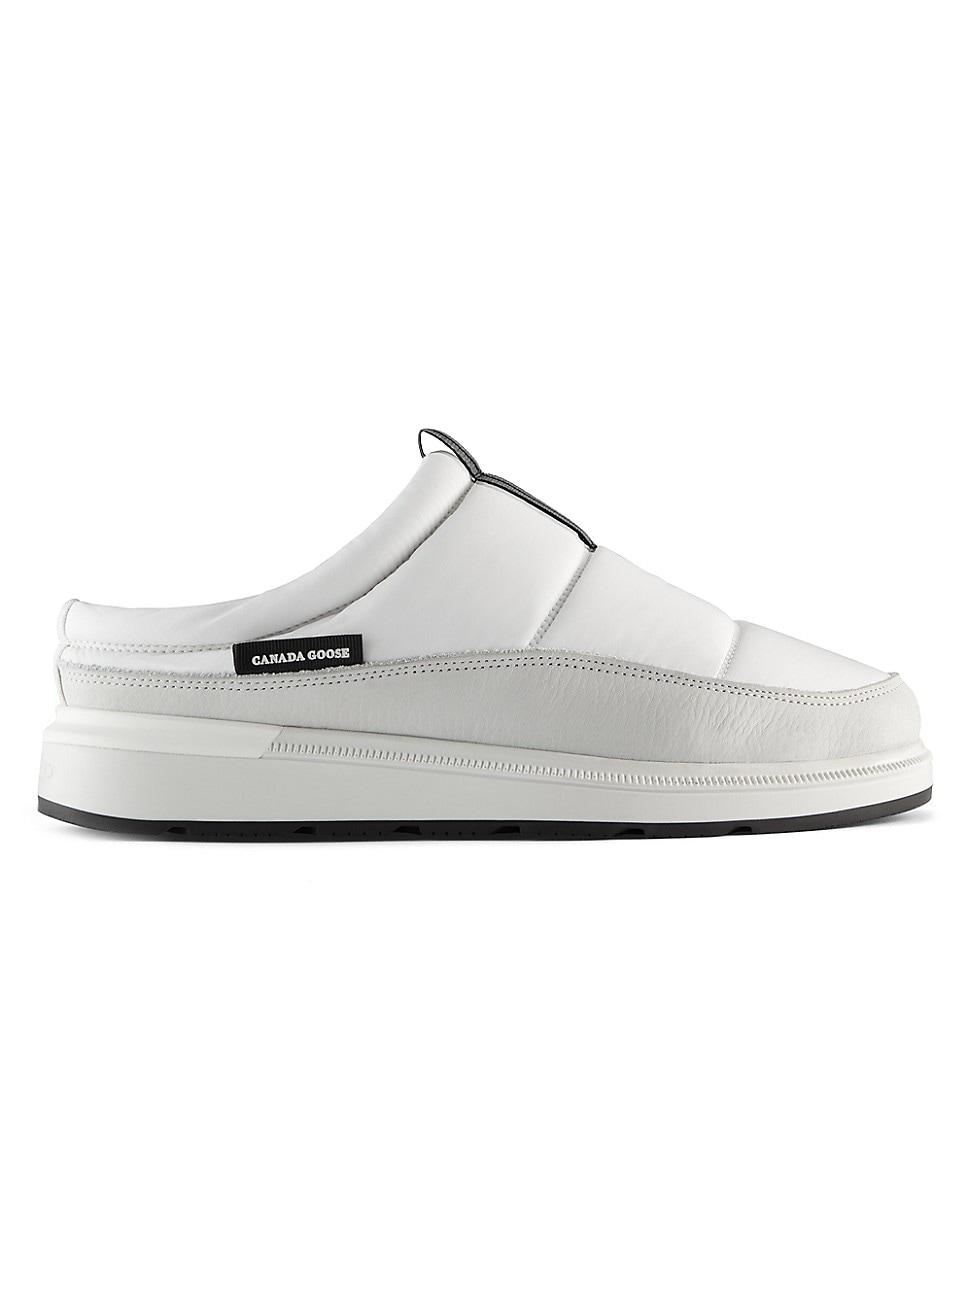 Canada Goose Quilted Nylon Mule Slippers in White | Lyst